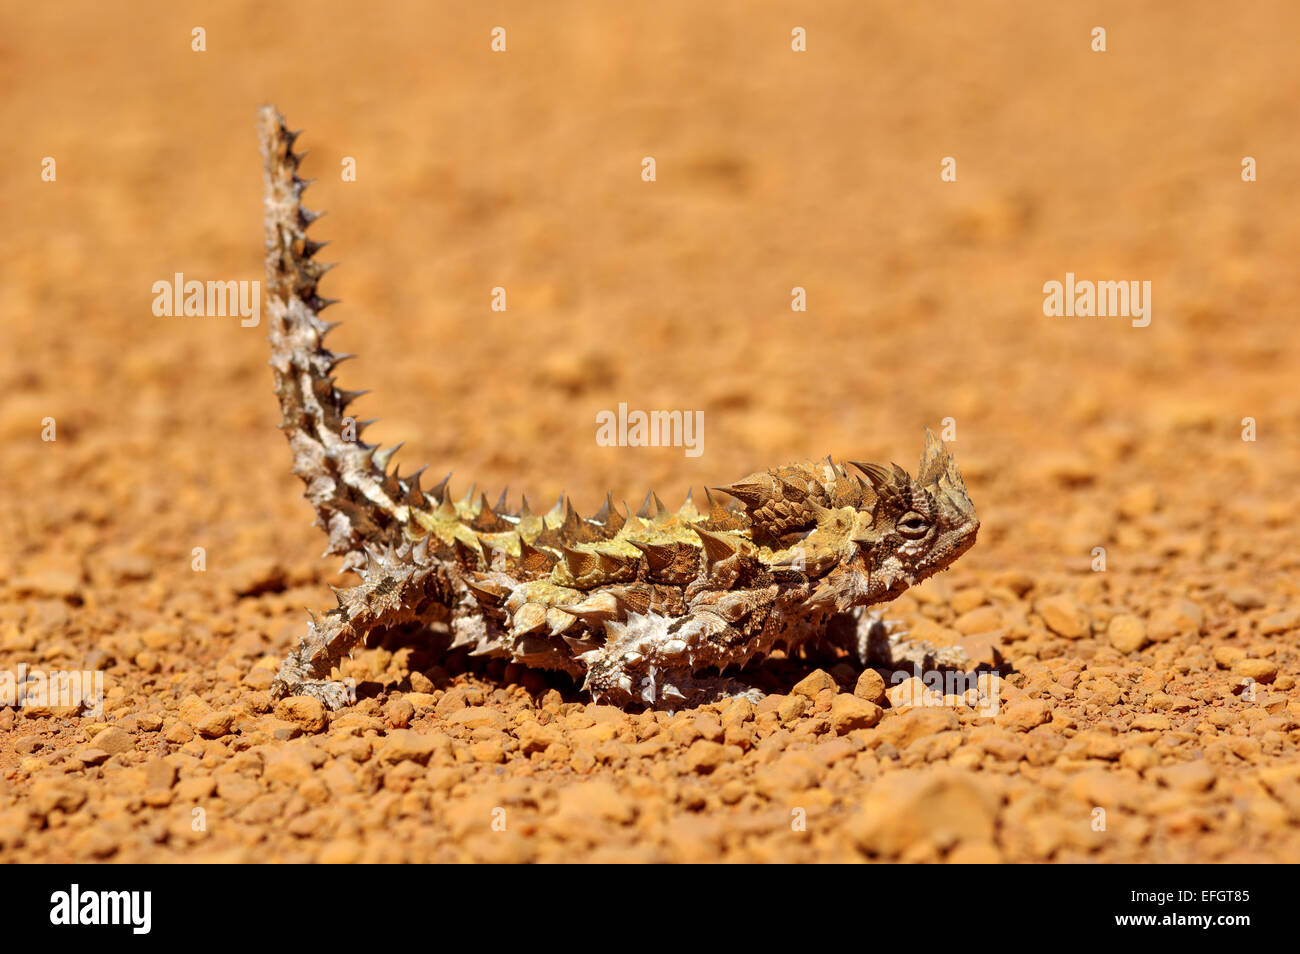 Thorny dragon or thorny devil (Moloch horridus) is an Australian lizard, this one was on an outback road in Western Australia. Stock Photo